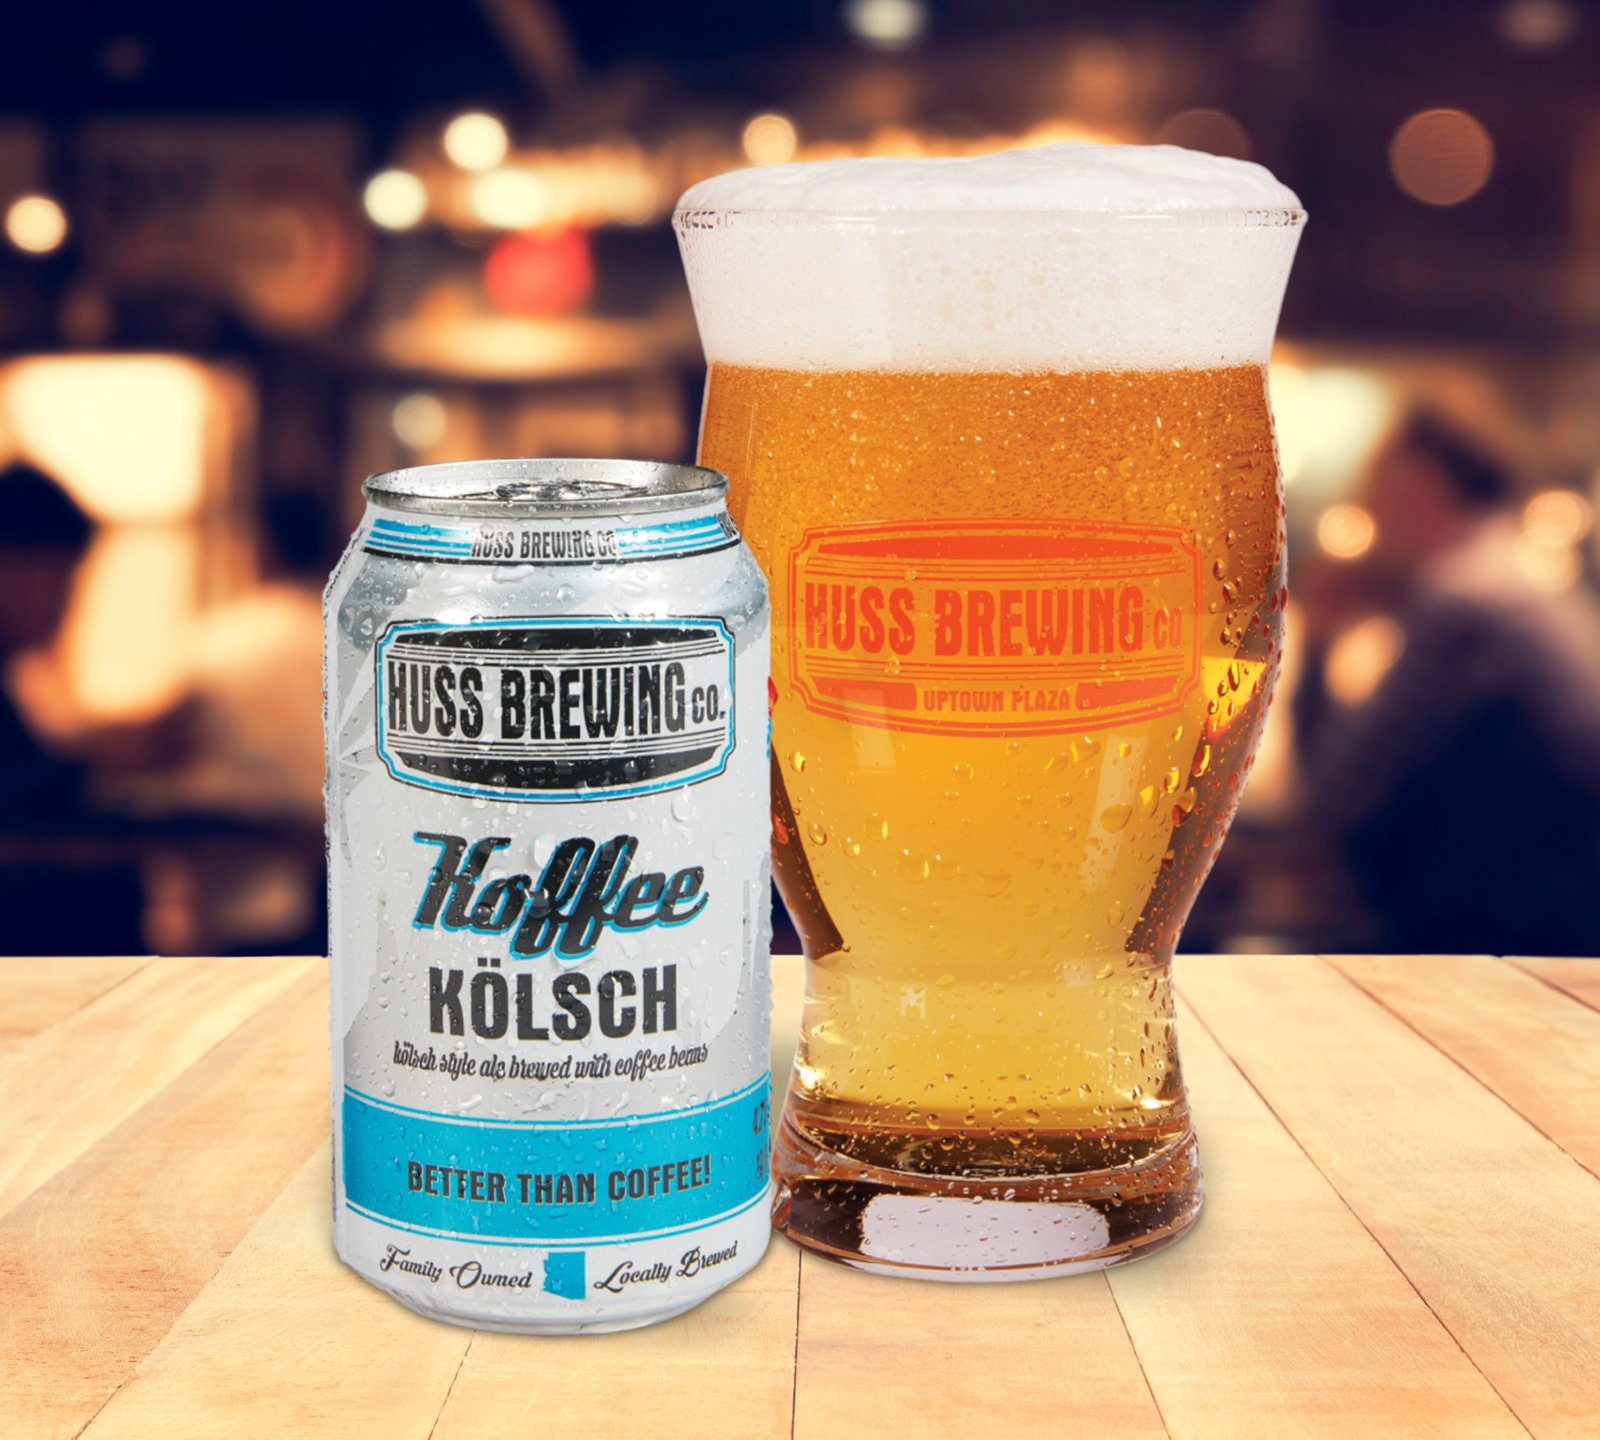 huss-brewery-launches-new-beers-in-ardagh-cans